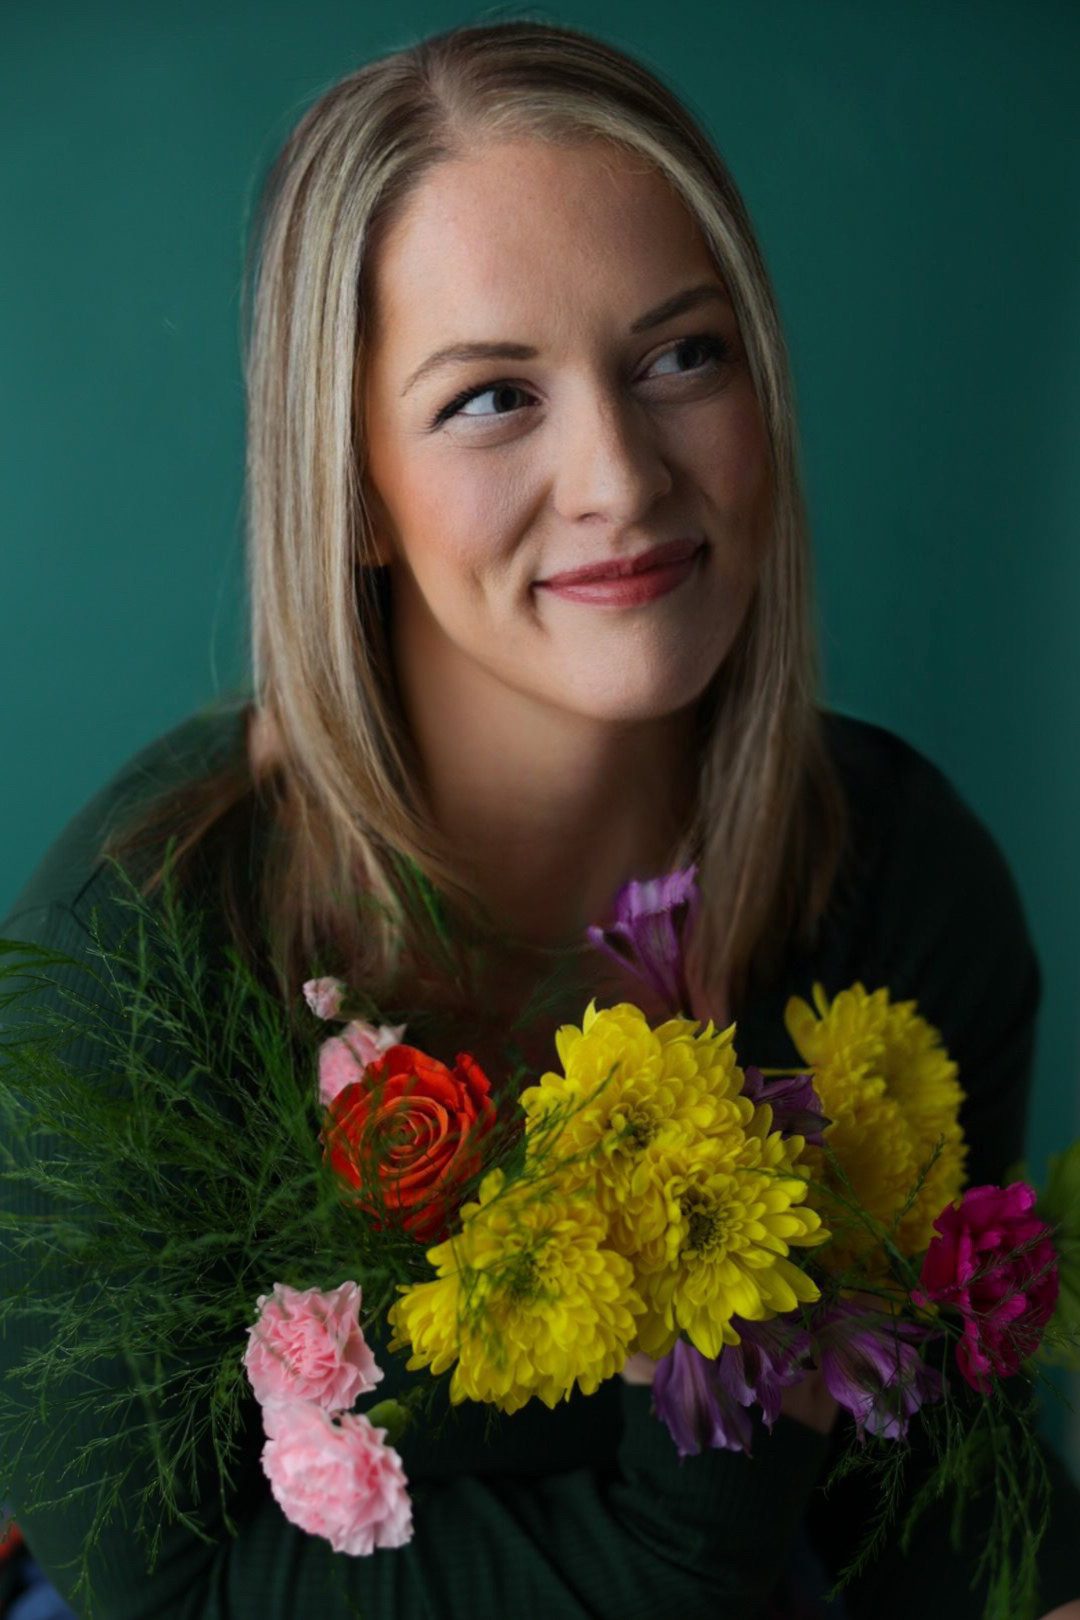 Portrait of Ashley, a professional photographer, gazing thoughtfully to the side, with a bouquet of vibrant flowers.